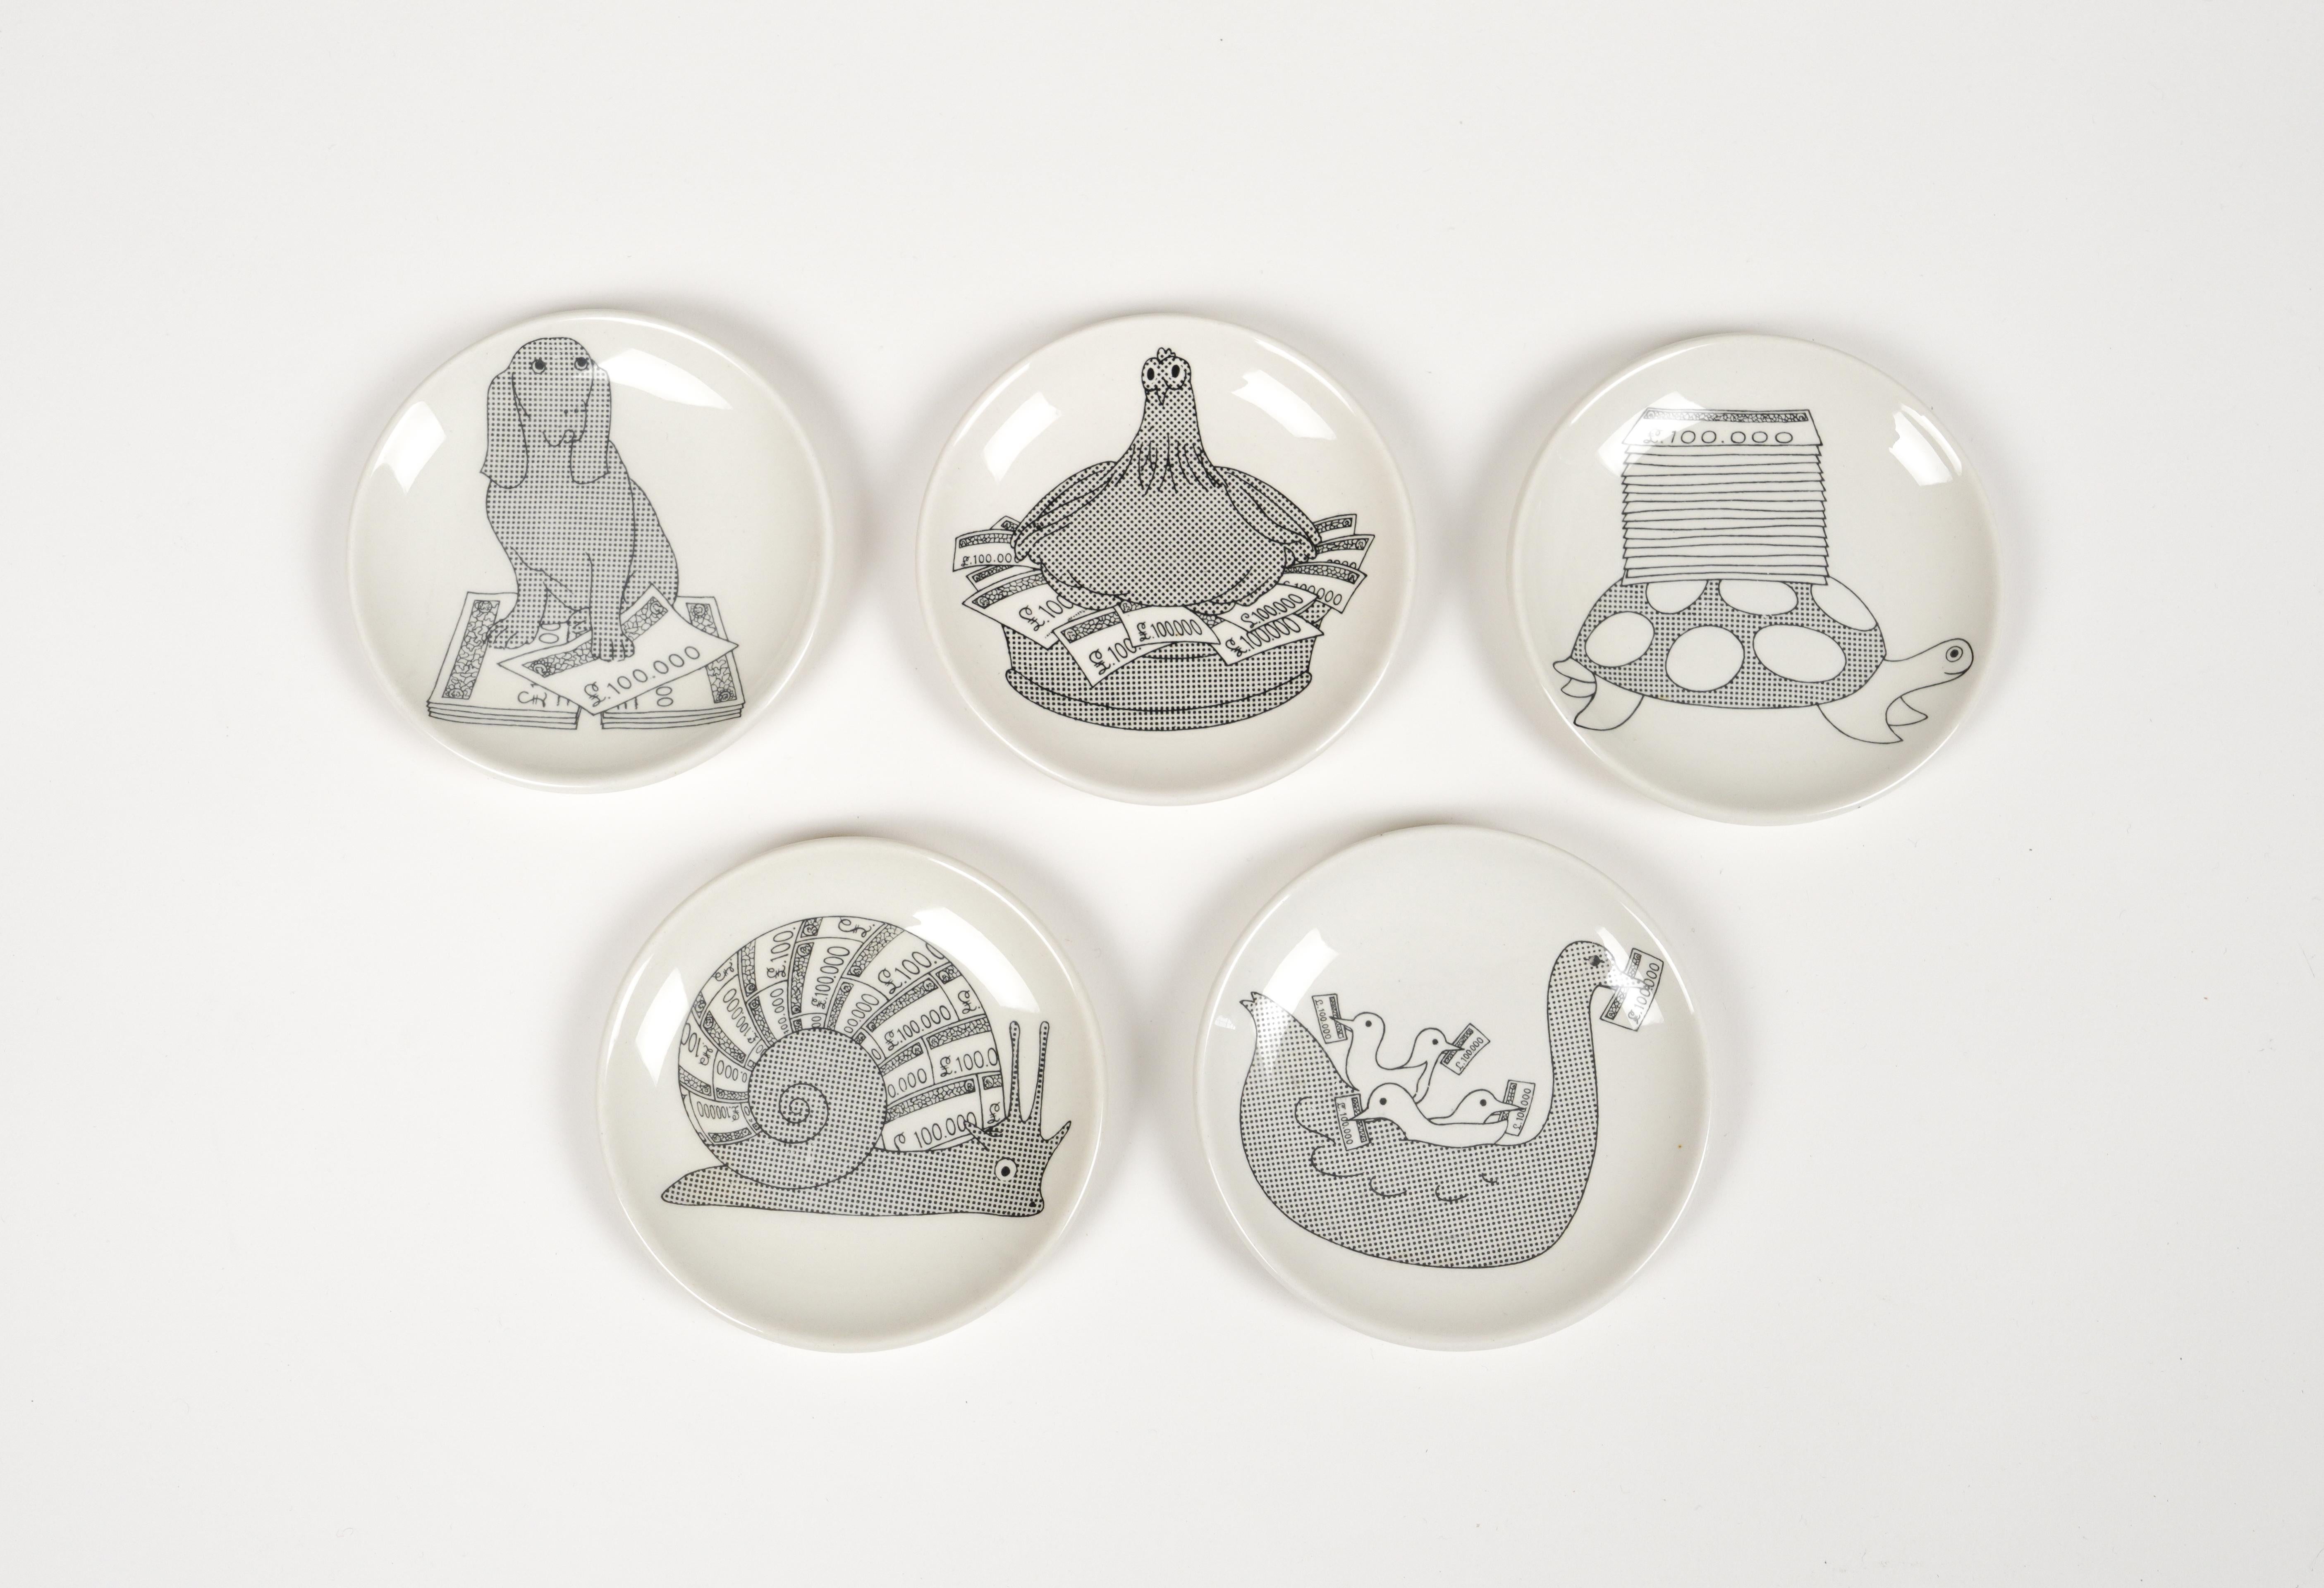 Mid-Century Modern Set of 5 Small Plate or Coasters in Porcelain by Piero Fornasetti, Italy 1950s For Sale